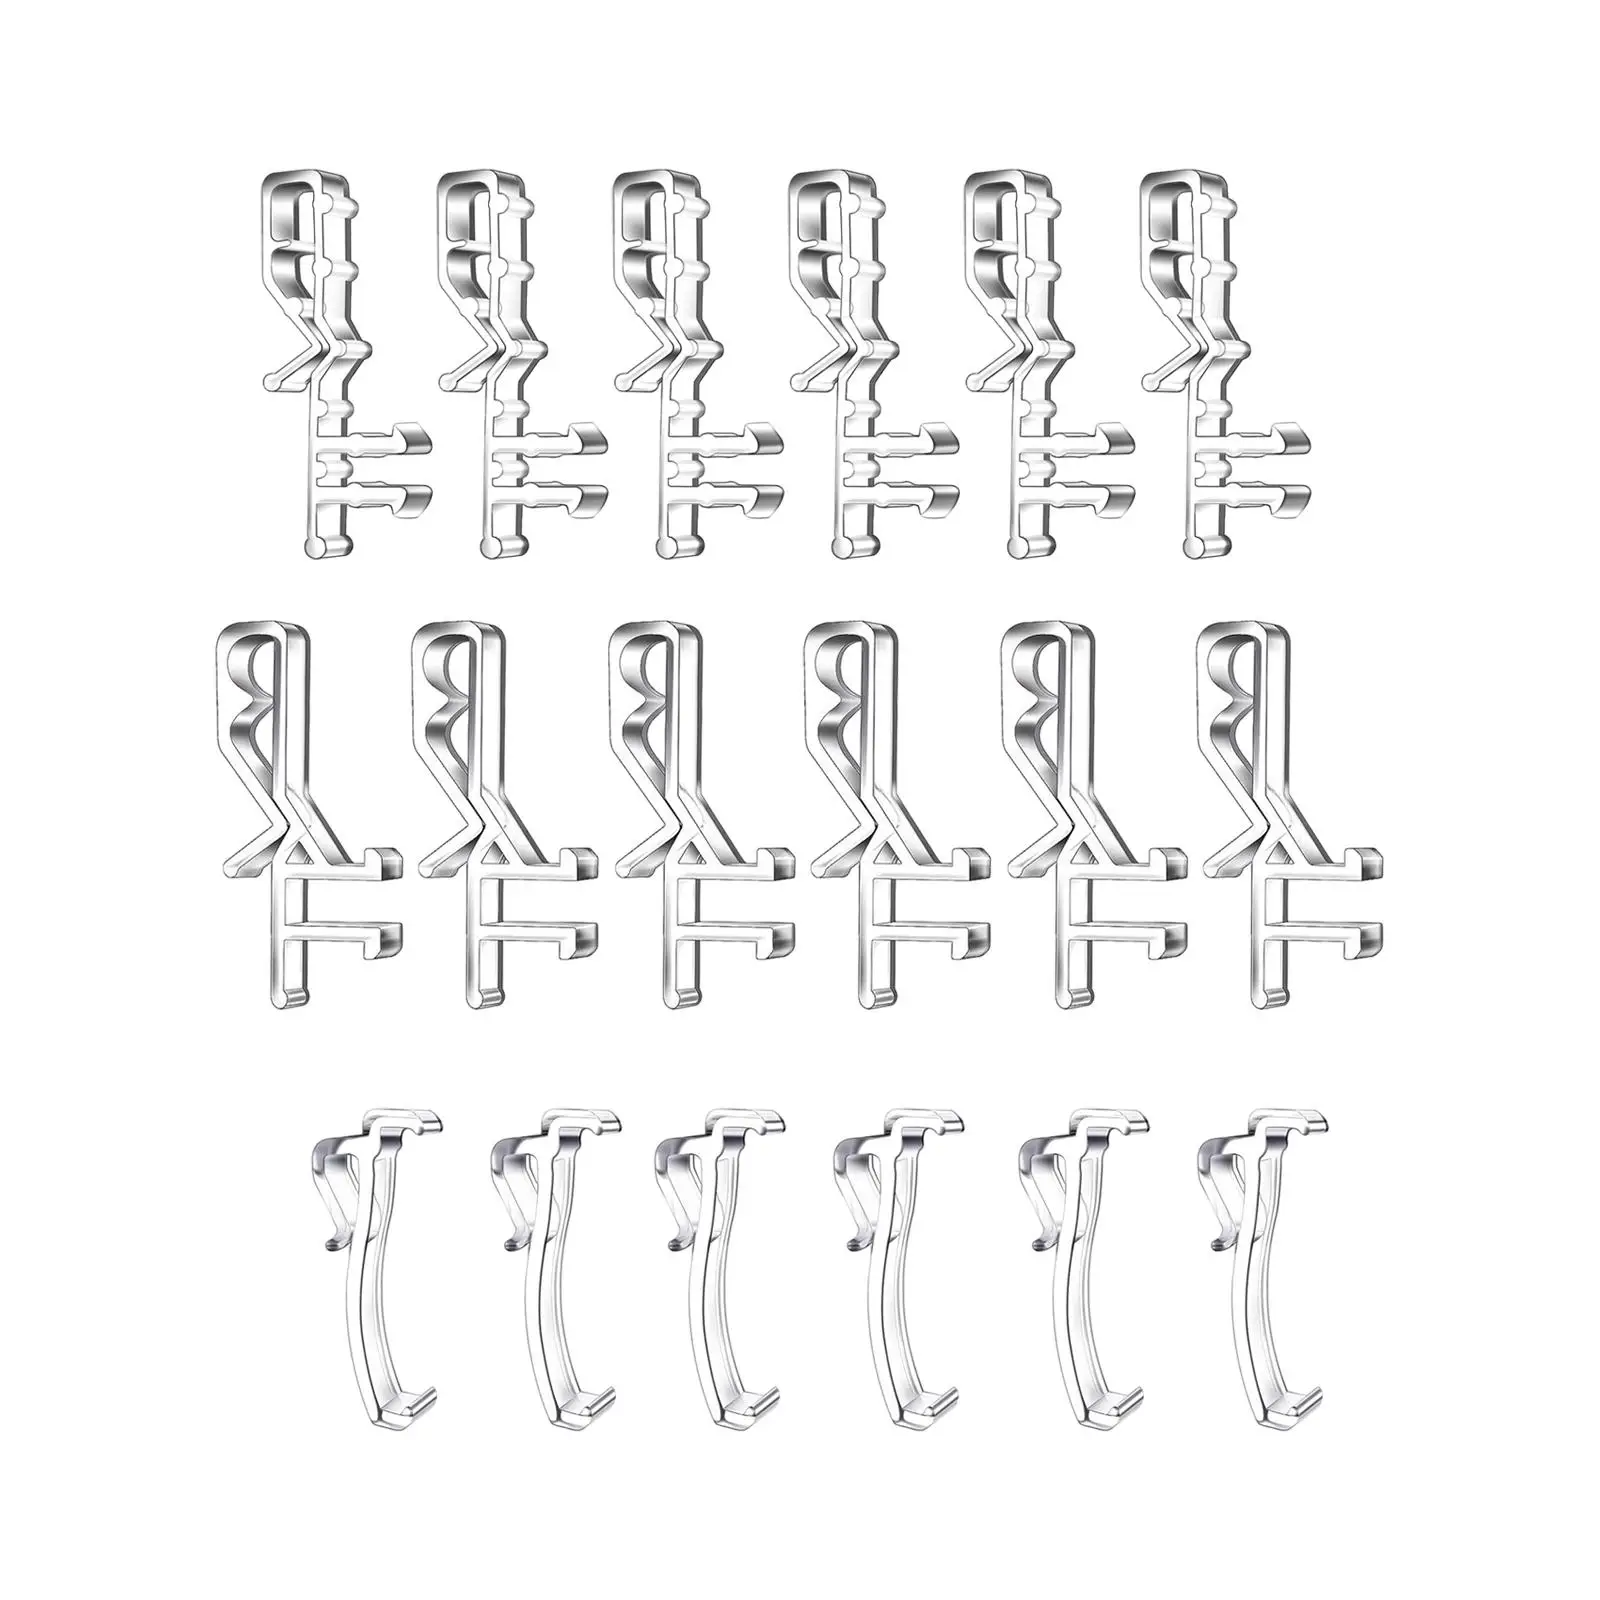 18x Channel Valance Clips Blind Channel Cover Clips Transparent Valance Retainers for Bedroom Living Room Home Kitchen Office